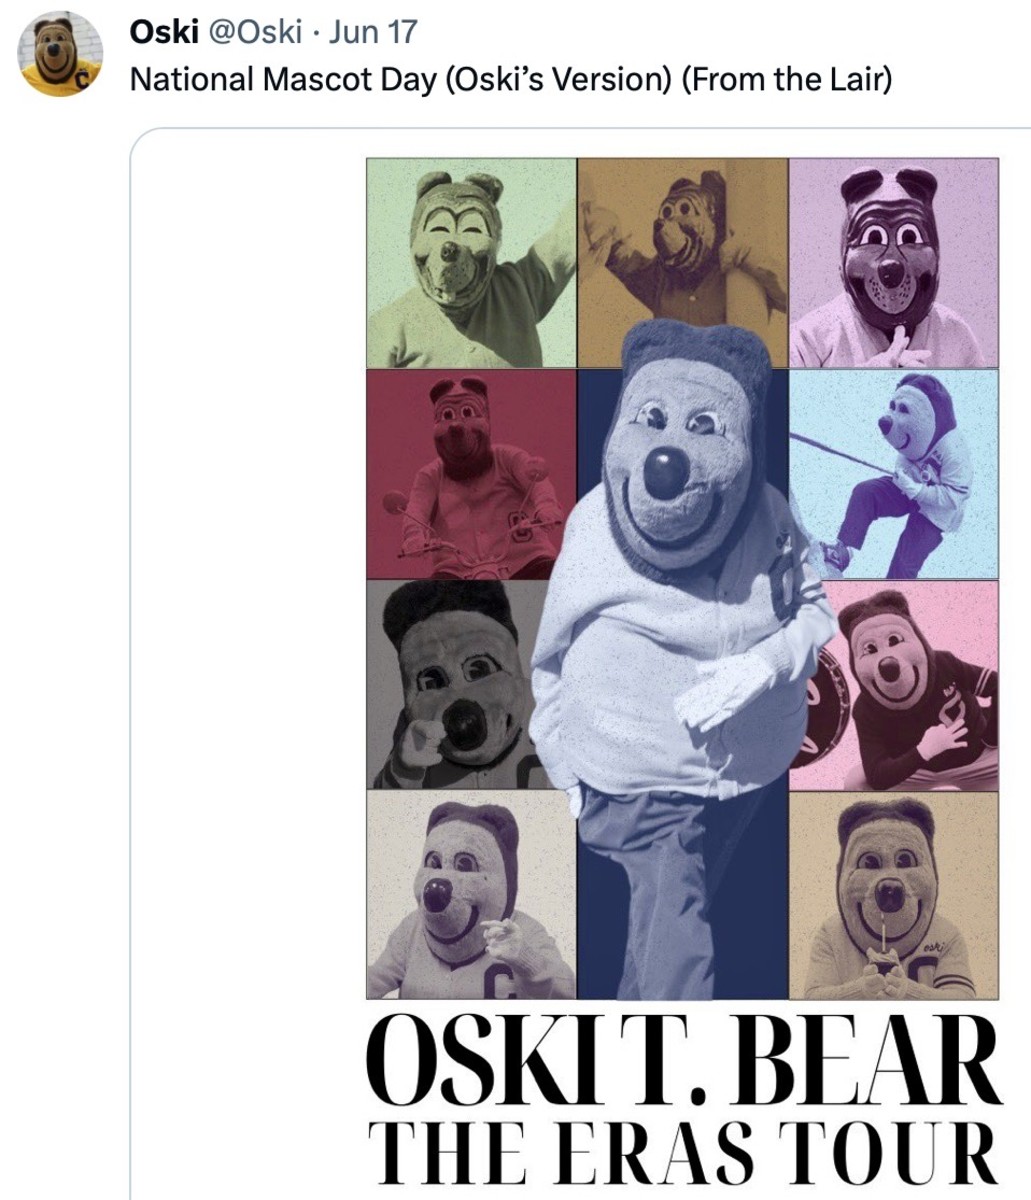 Oski over the years